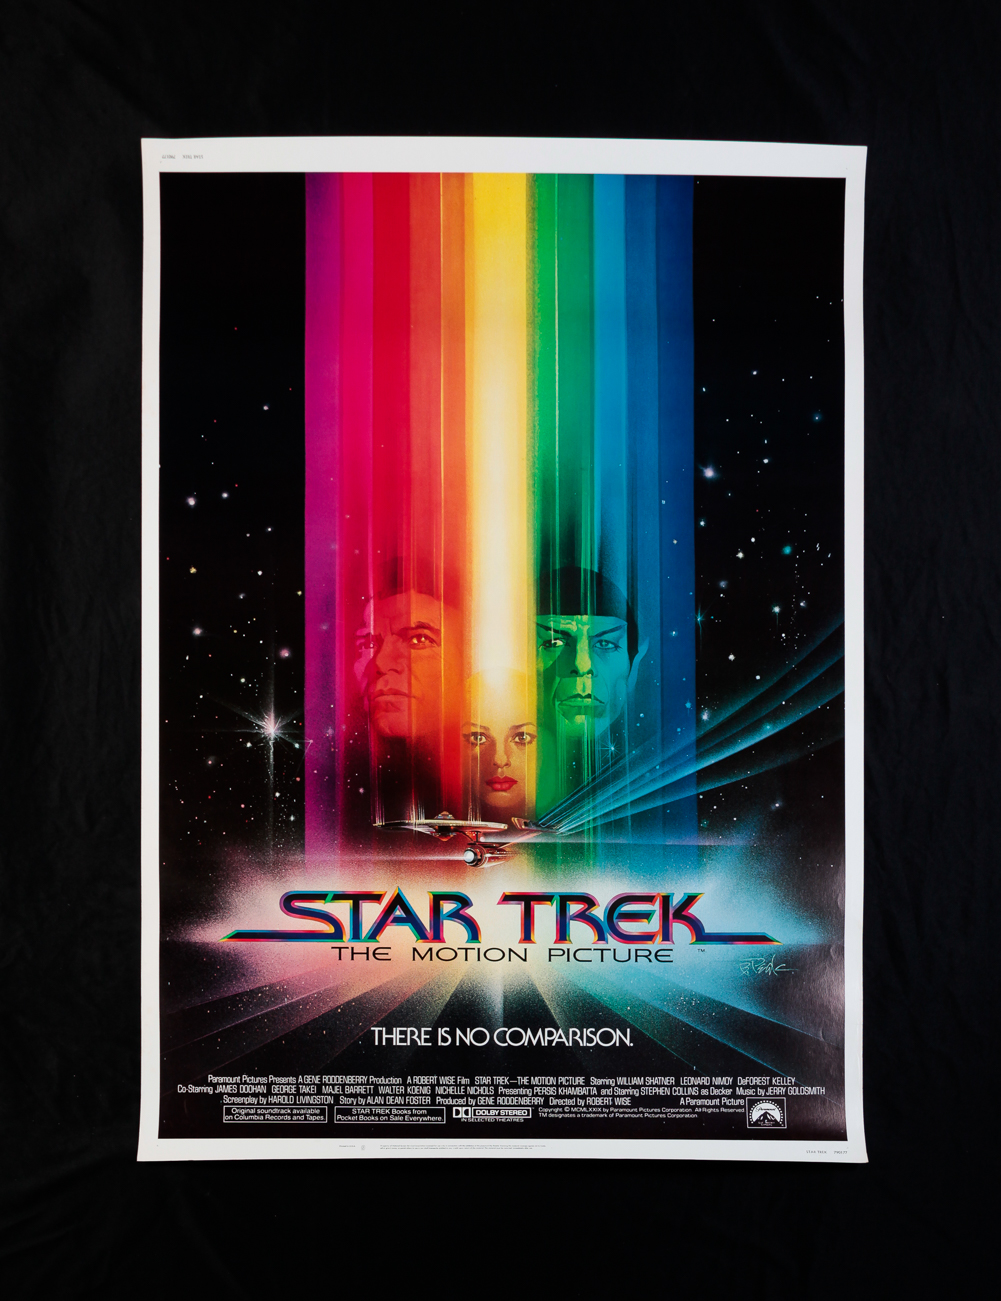 STAR TREK: THE MOTION PICTURE (PARAMOUNT,